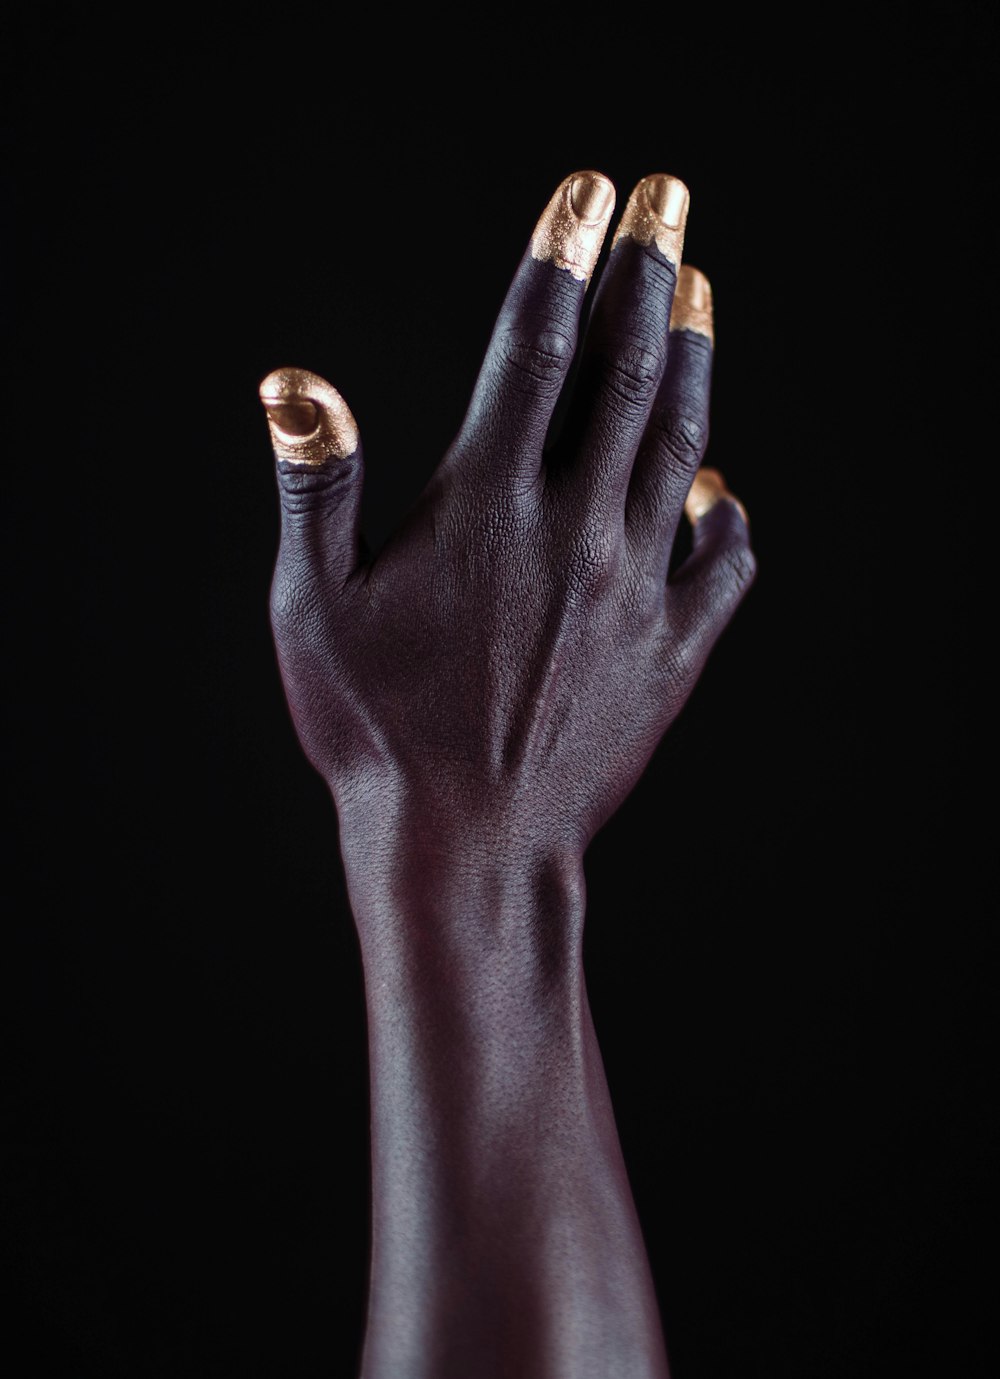 gold-dipped person's fingers